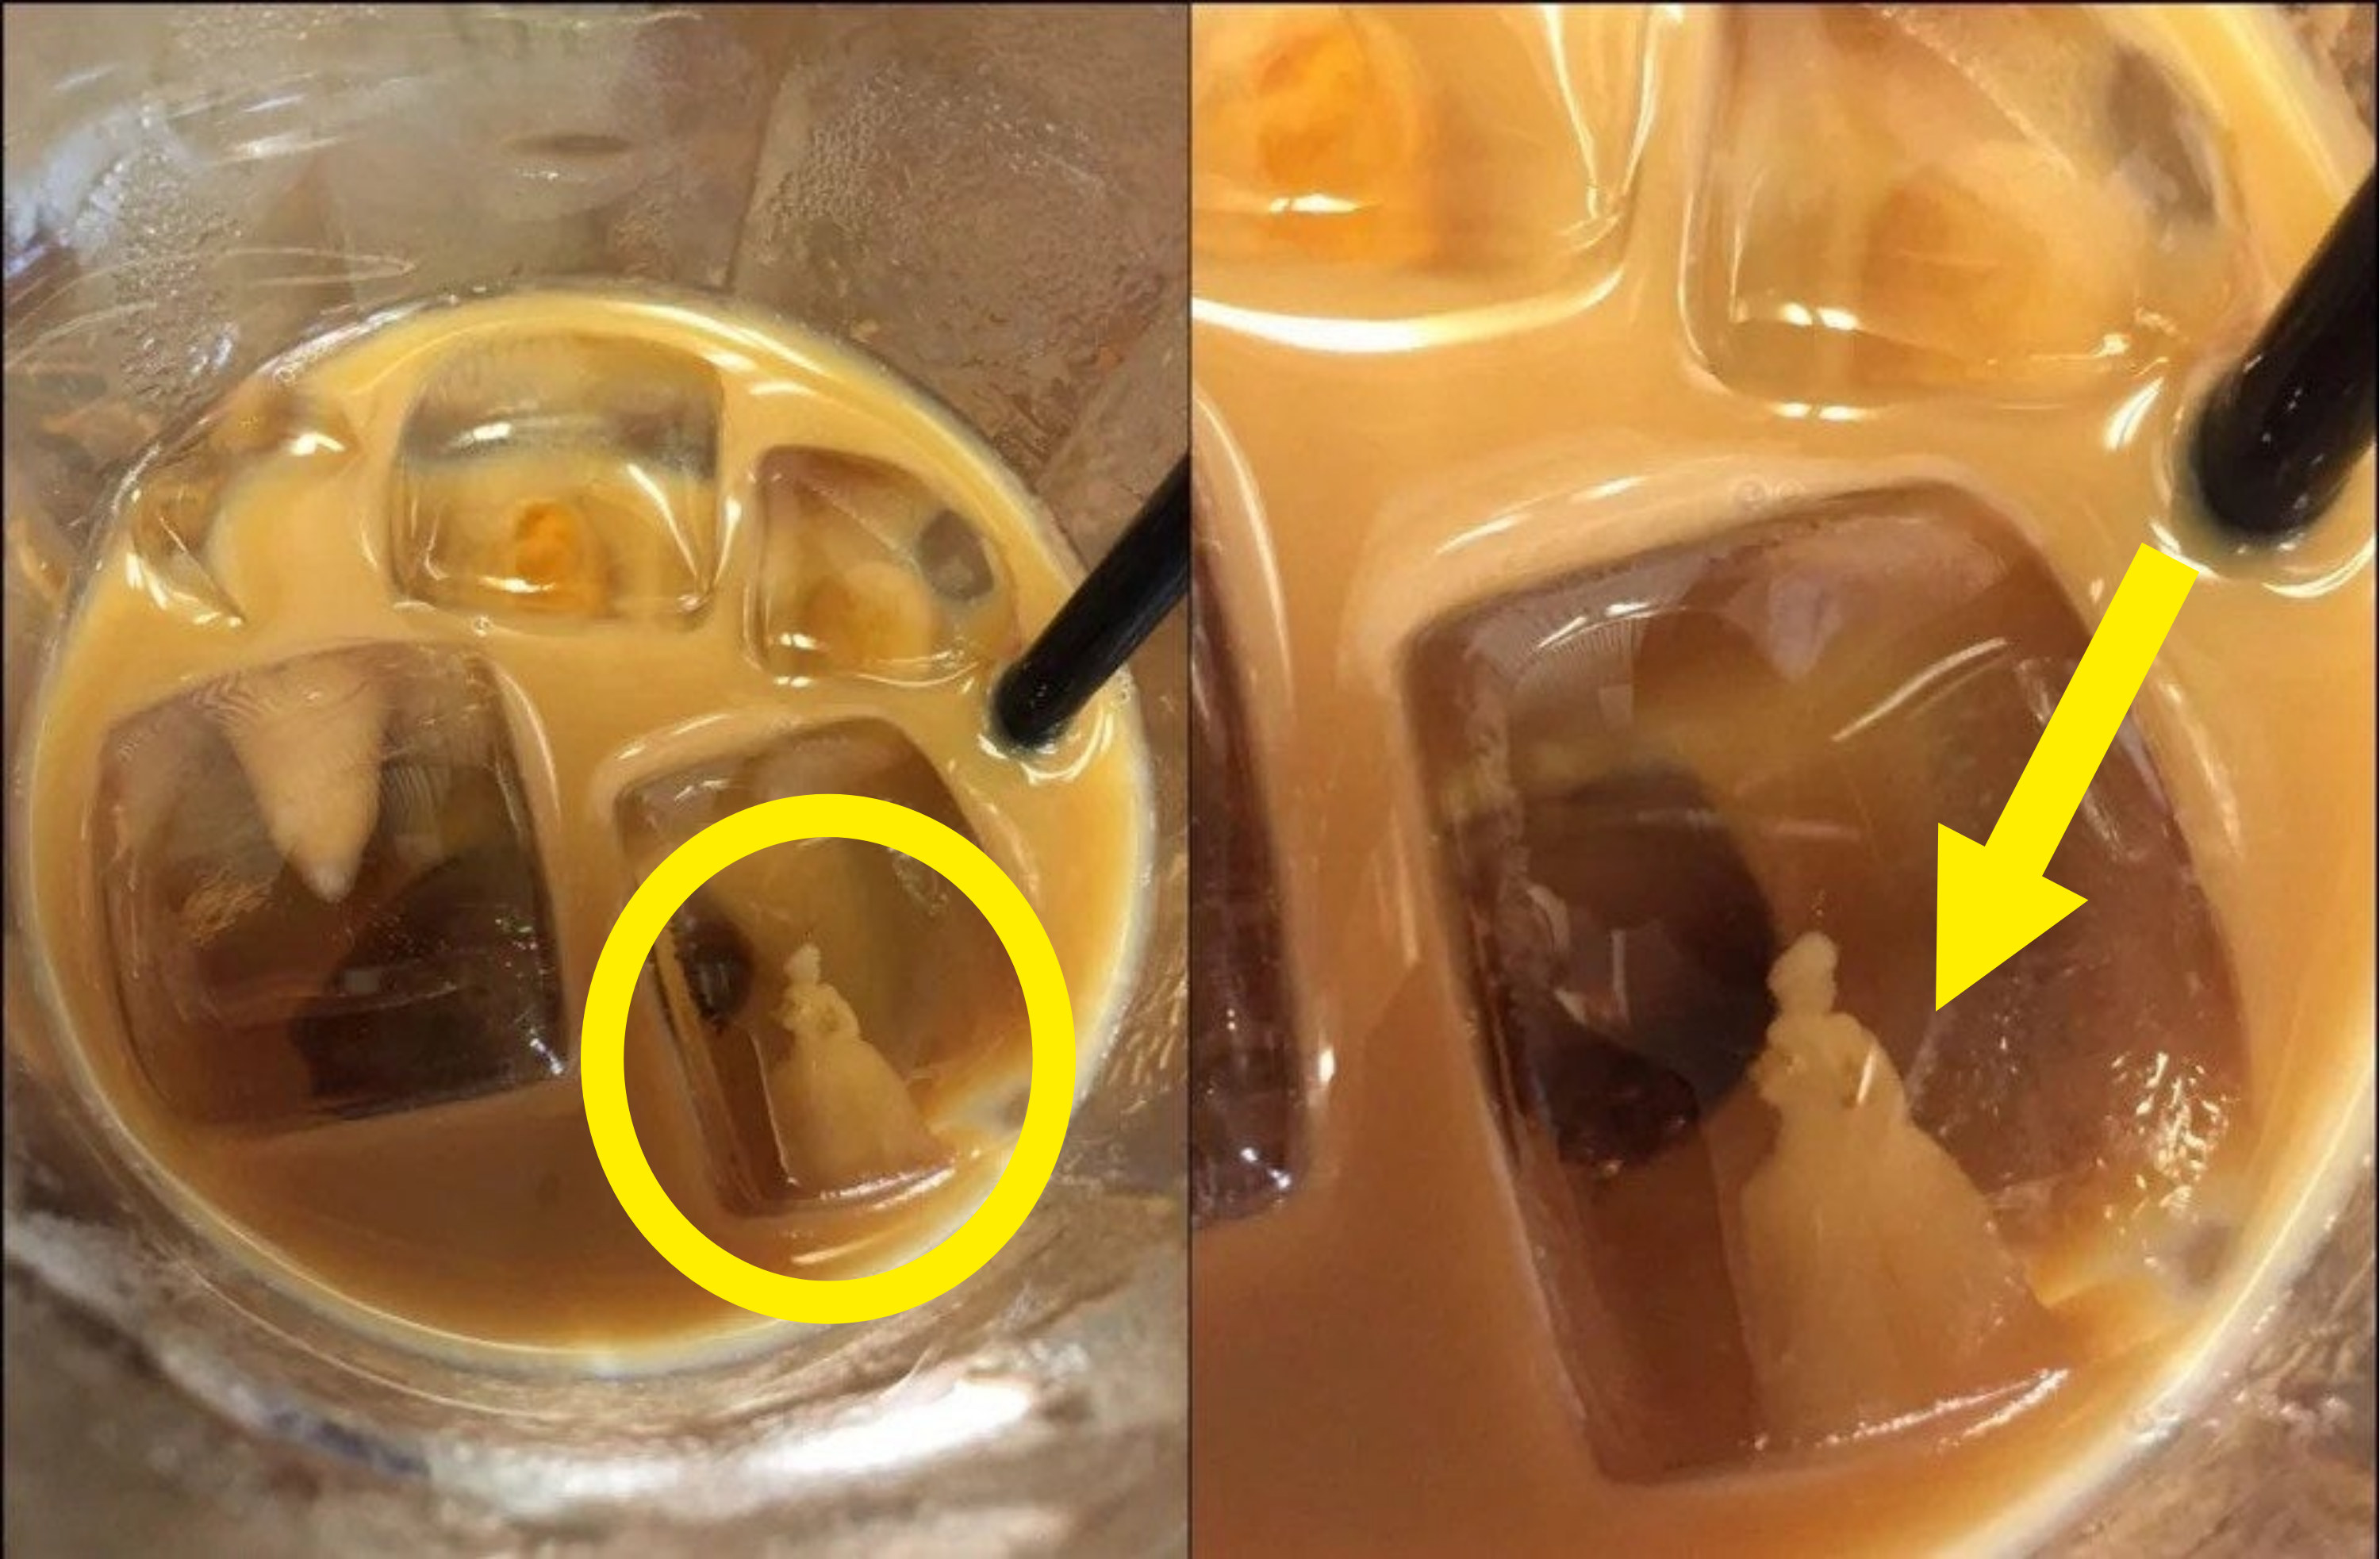 an iced coffee drink with ice cubes, and inside one of the cubes is the silhouette of a woman with a dress that looks like Ariel from the little mermaid